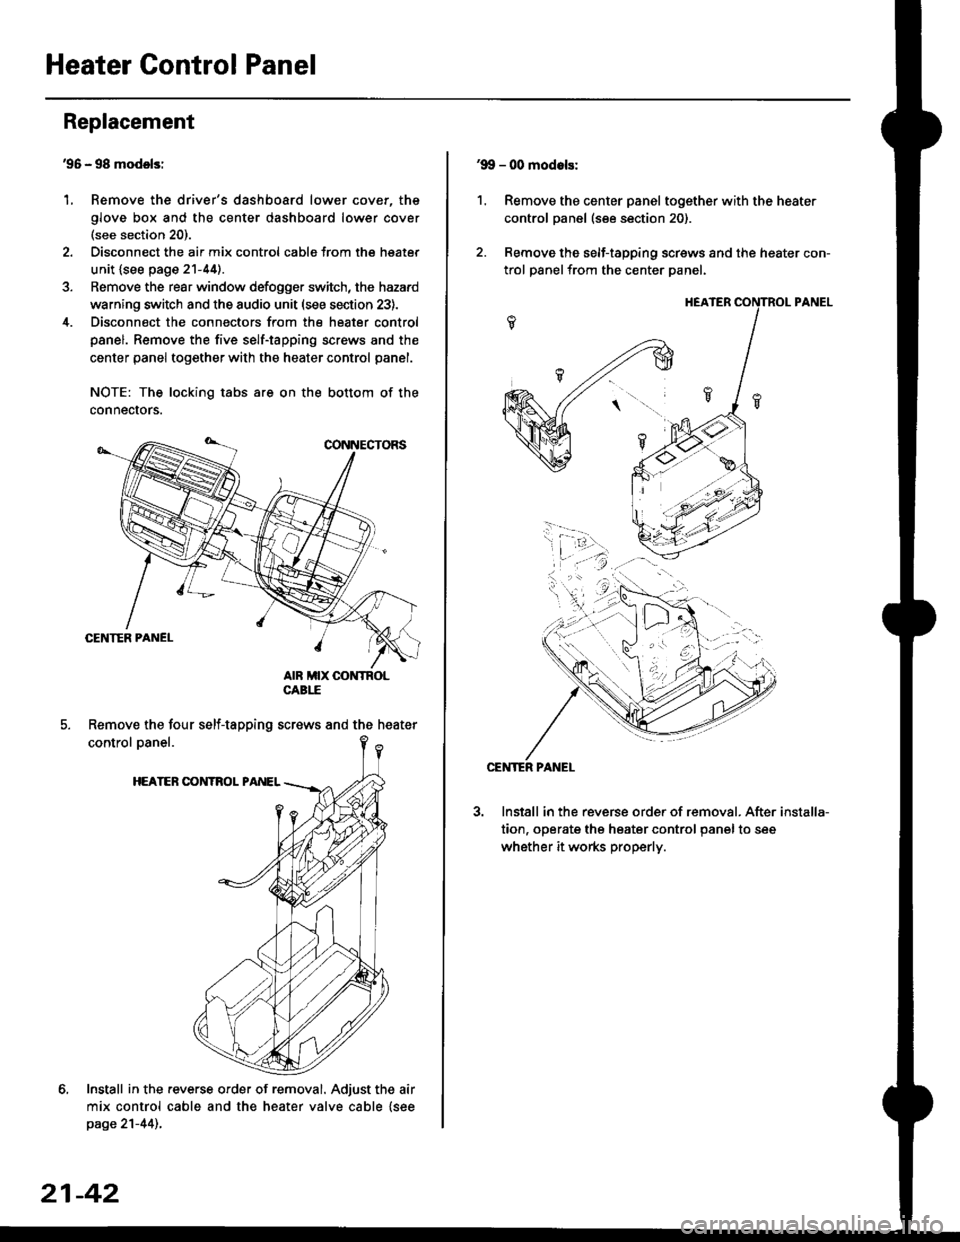 HONDA CIVIC 1997 6.G Workshop Manual Heater Control Panel
95 - 98 modolsi
Remove the drivers dashboard lower cover, the
glove box and the center dashboard lower cover(see section 20).
Disconnect the air mix control cabls from the heate